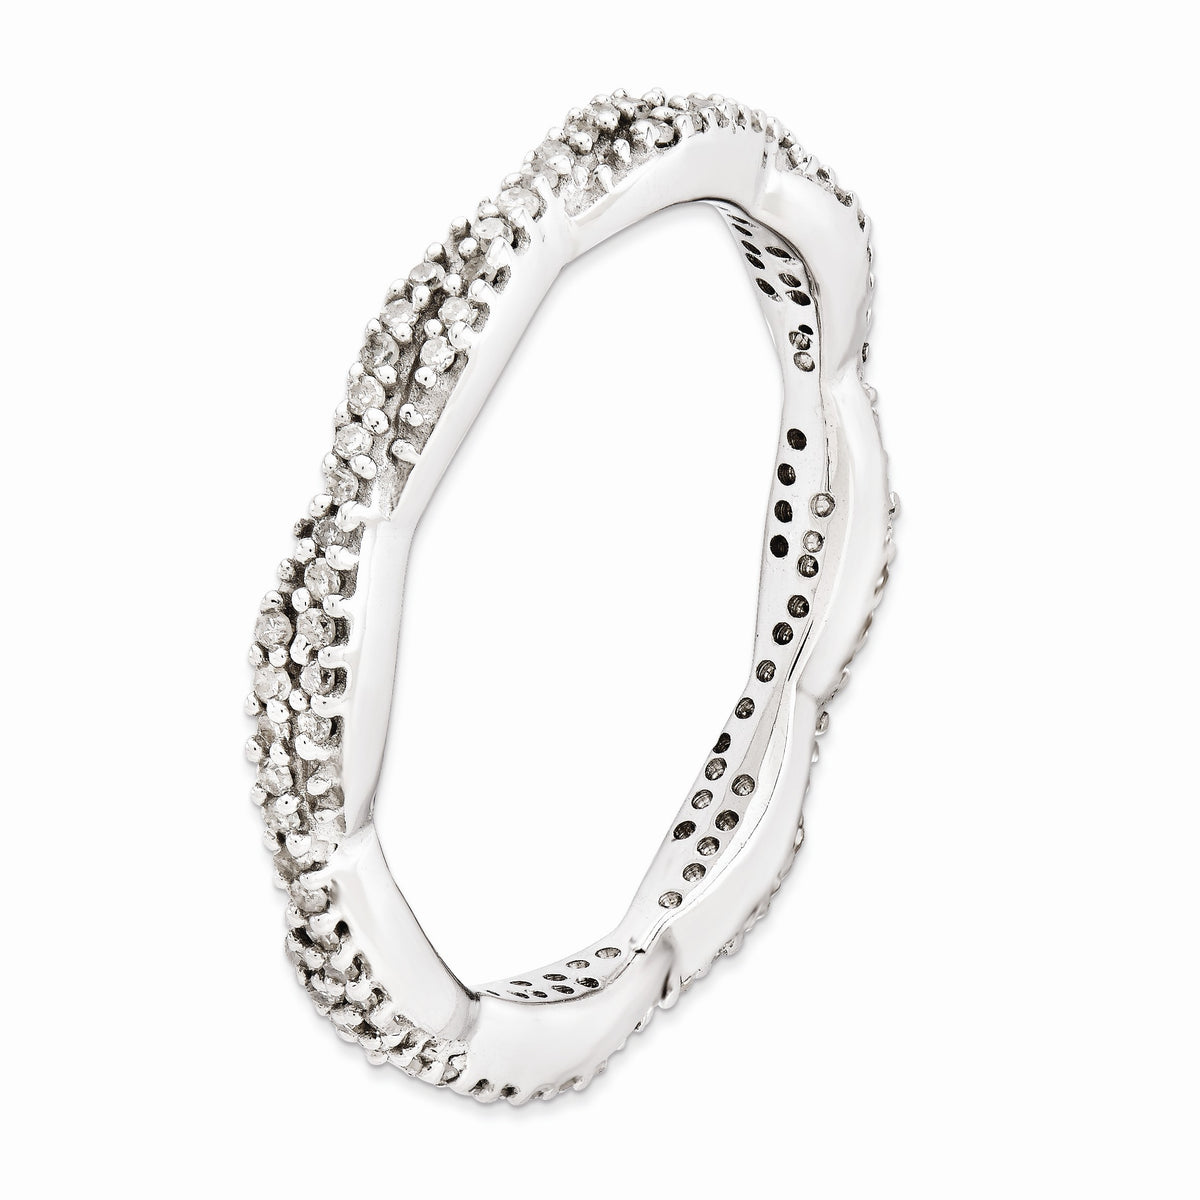 Alternate view of the 2.5mm Silver Stackable 1/4 Cttw HI/I3 Diamond Twisted Band by The Black Bow Jewelry Co.